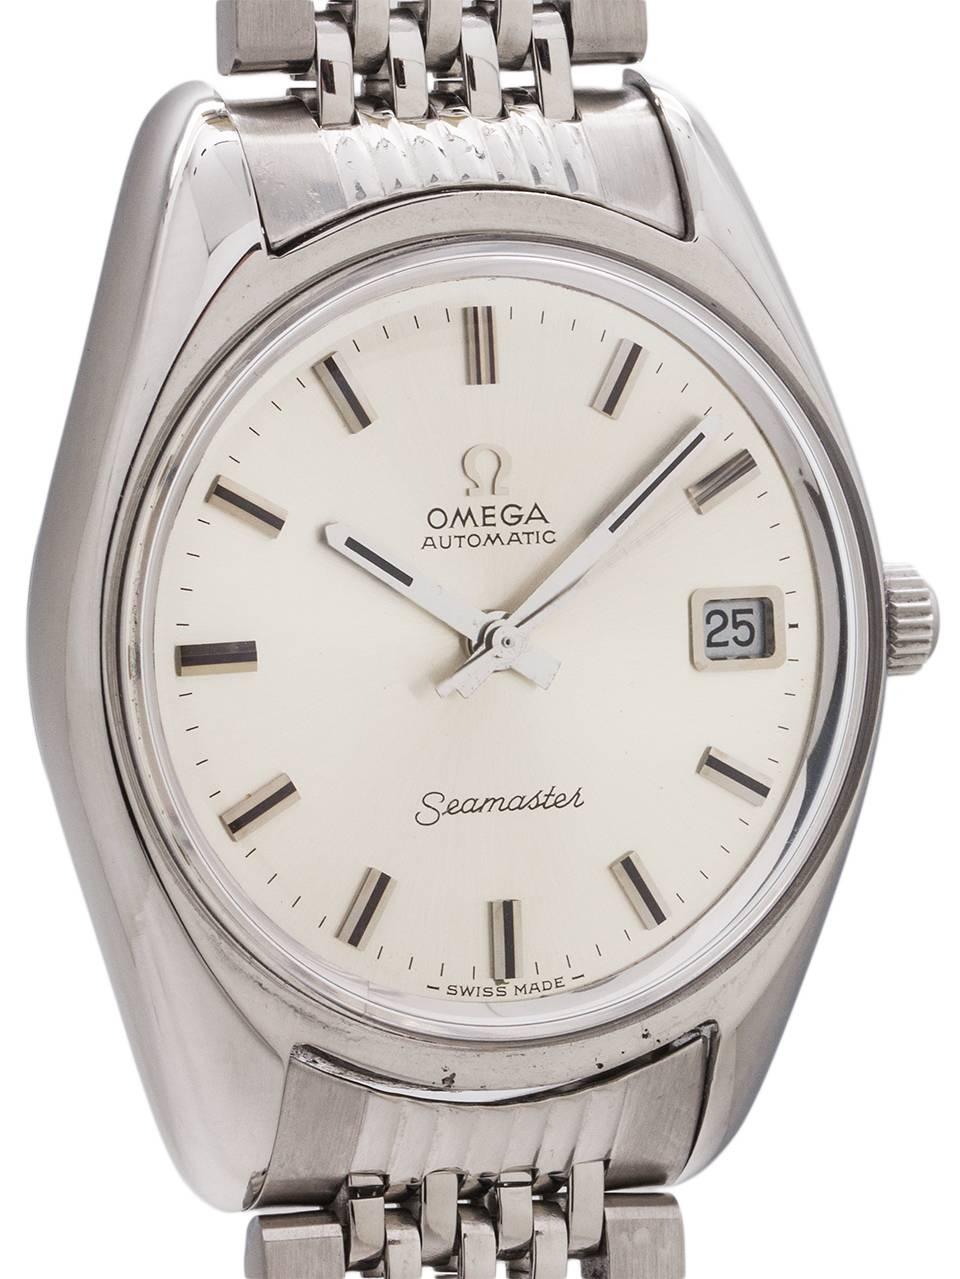 
A truly exceptional example Omega Seamaster automatic with date ref 166.067 stainless steel circa 1971. Featuring a robust 35 x 42mm diameter case with smooth wide bezel, substantial contoured lugs and acrylic crystal with signed Omega crown and